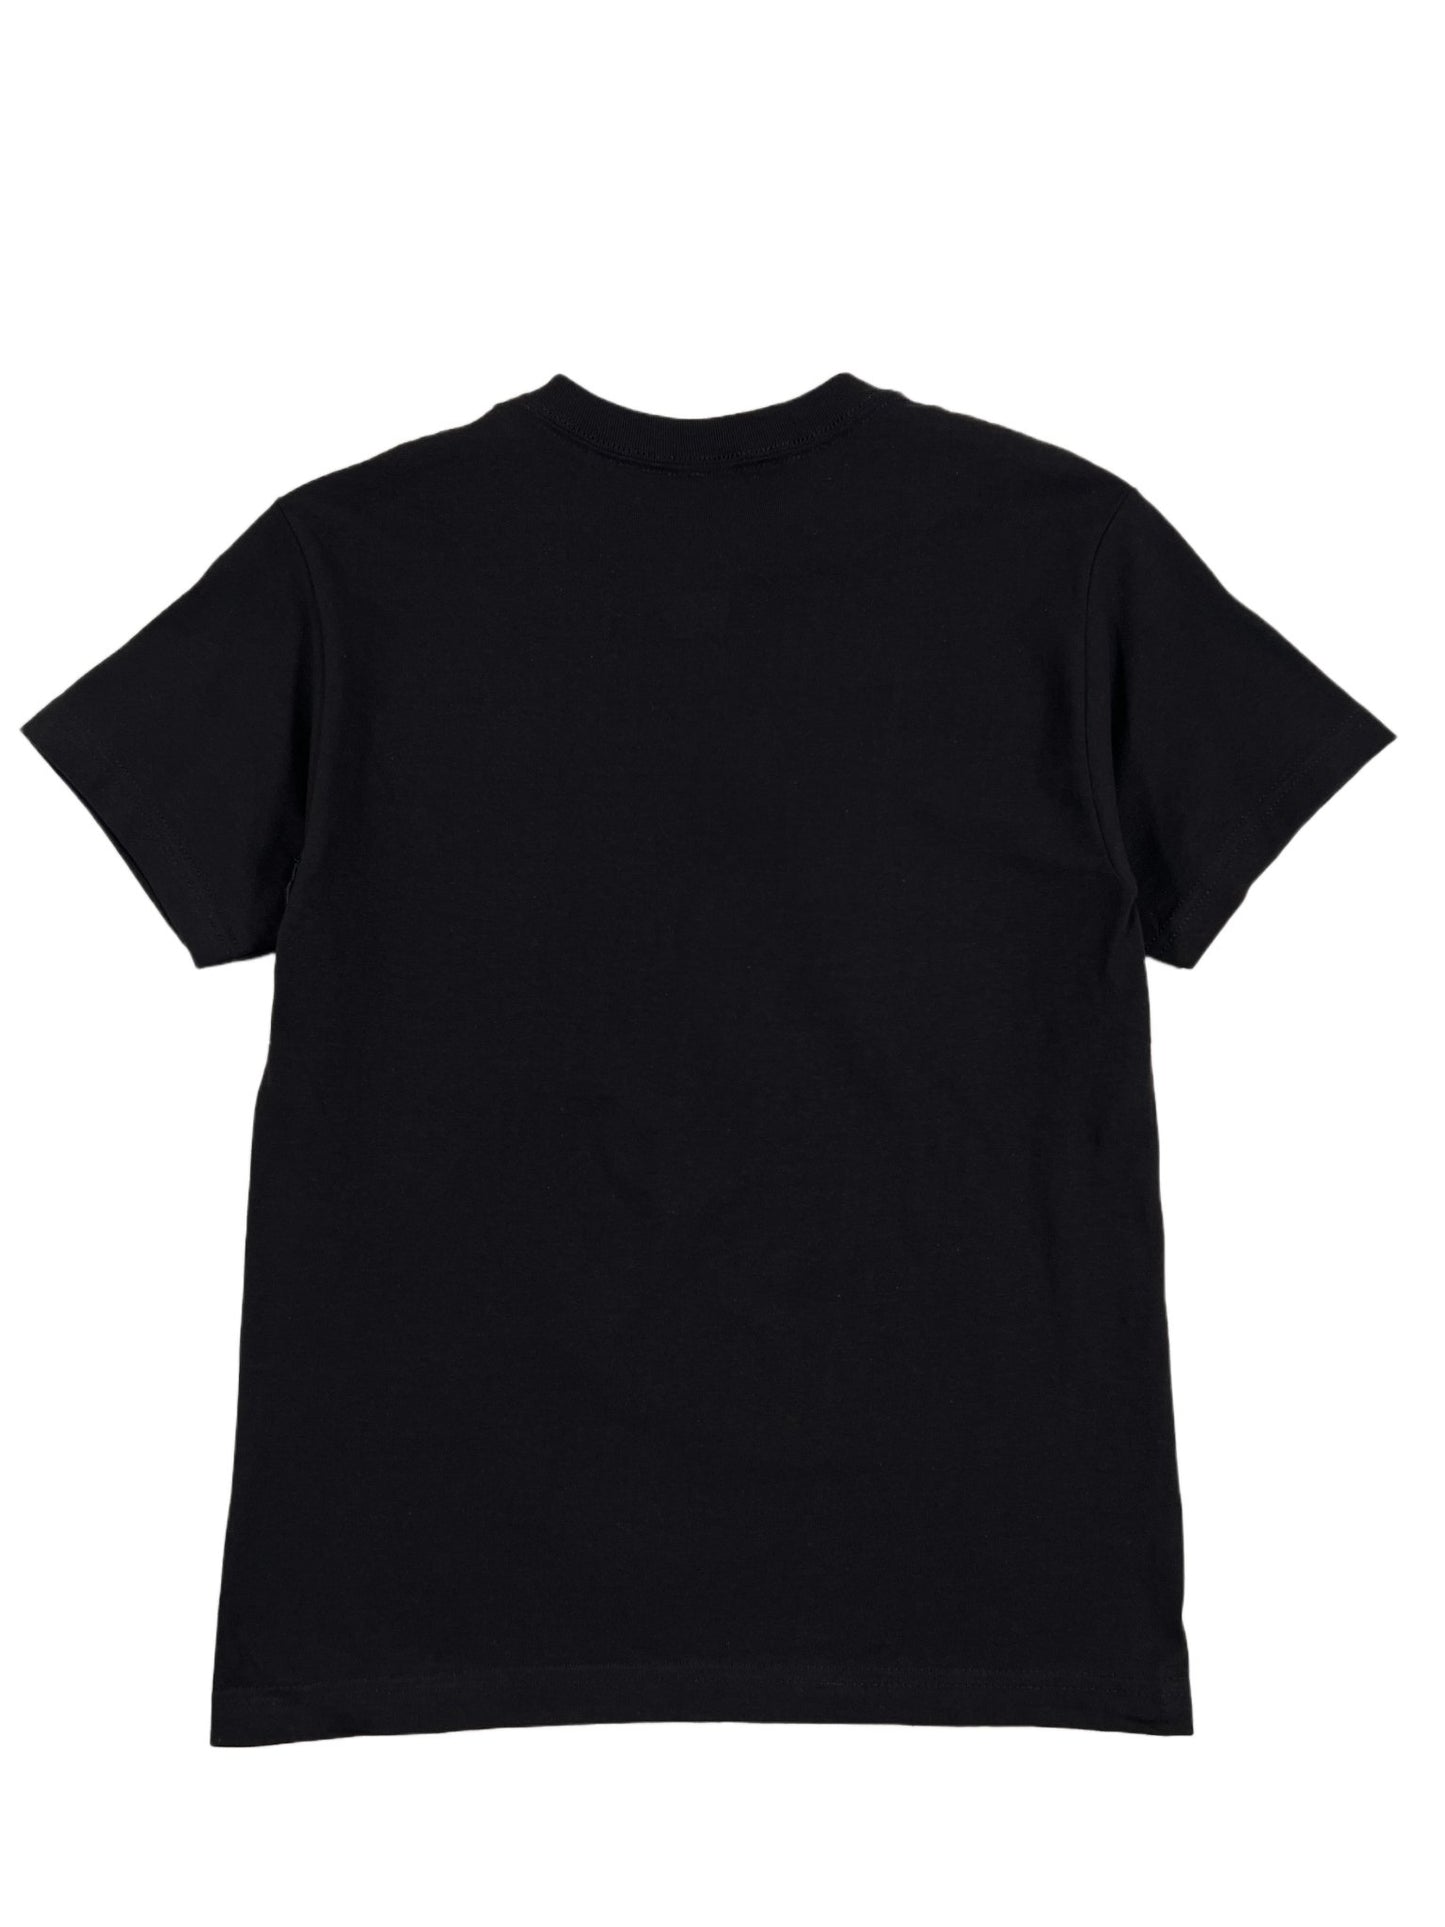 A black graphic PLEASURES EXPAND HEAVYWEIGHT SHIRT on a white background.